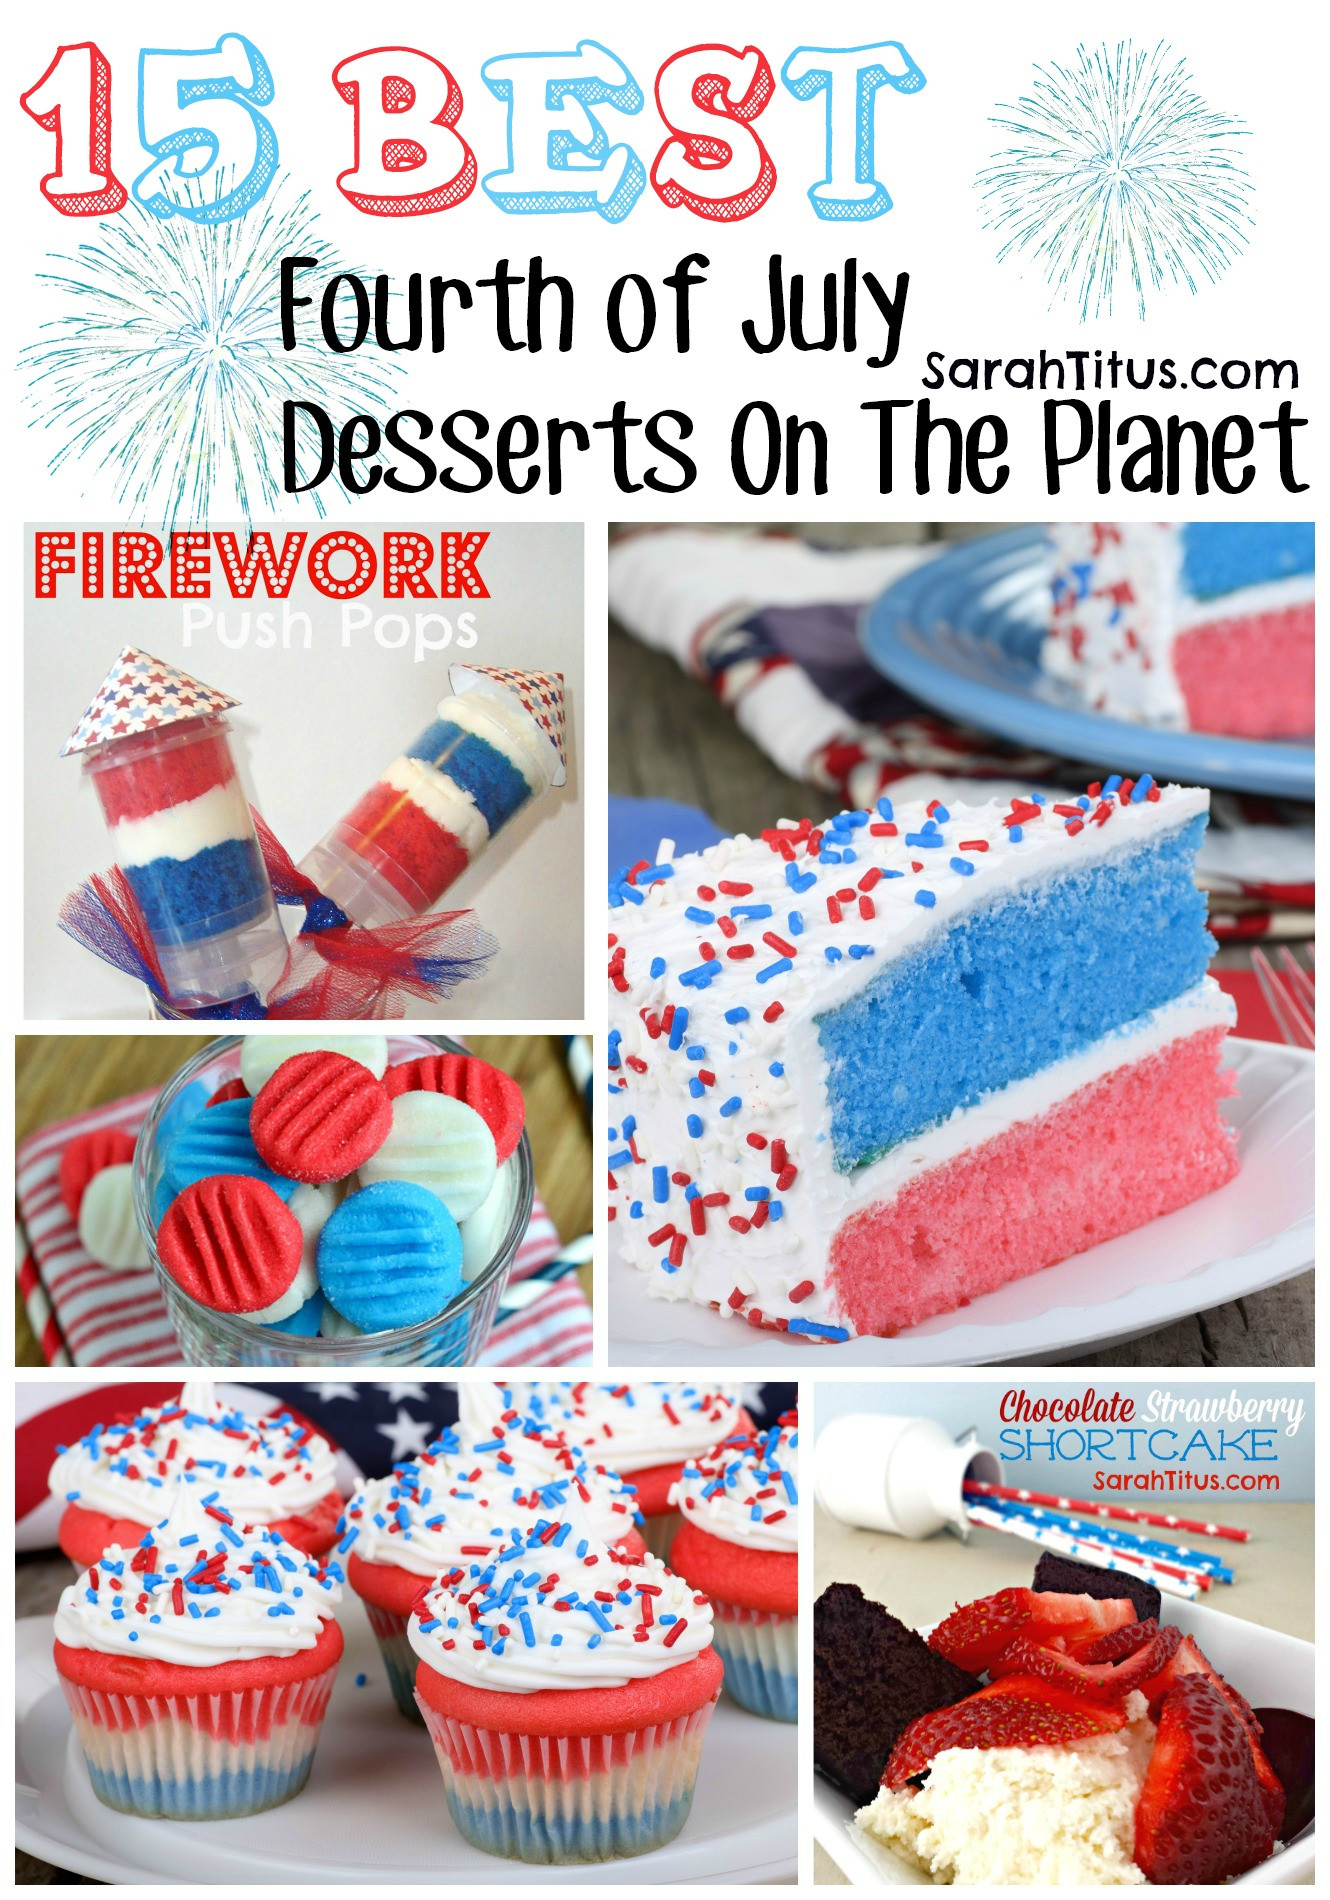 Best 4Th Of July Desserts
 15 Best Fourth of July Desserts The Planet Sarah Titus